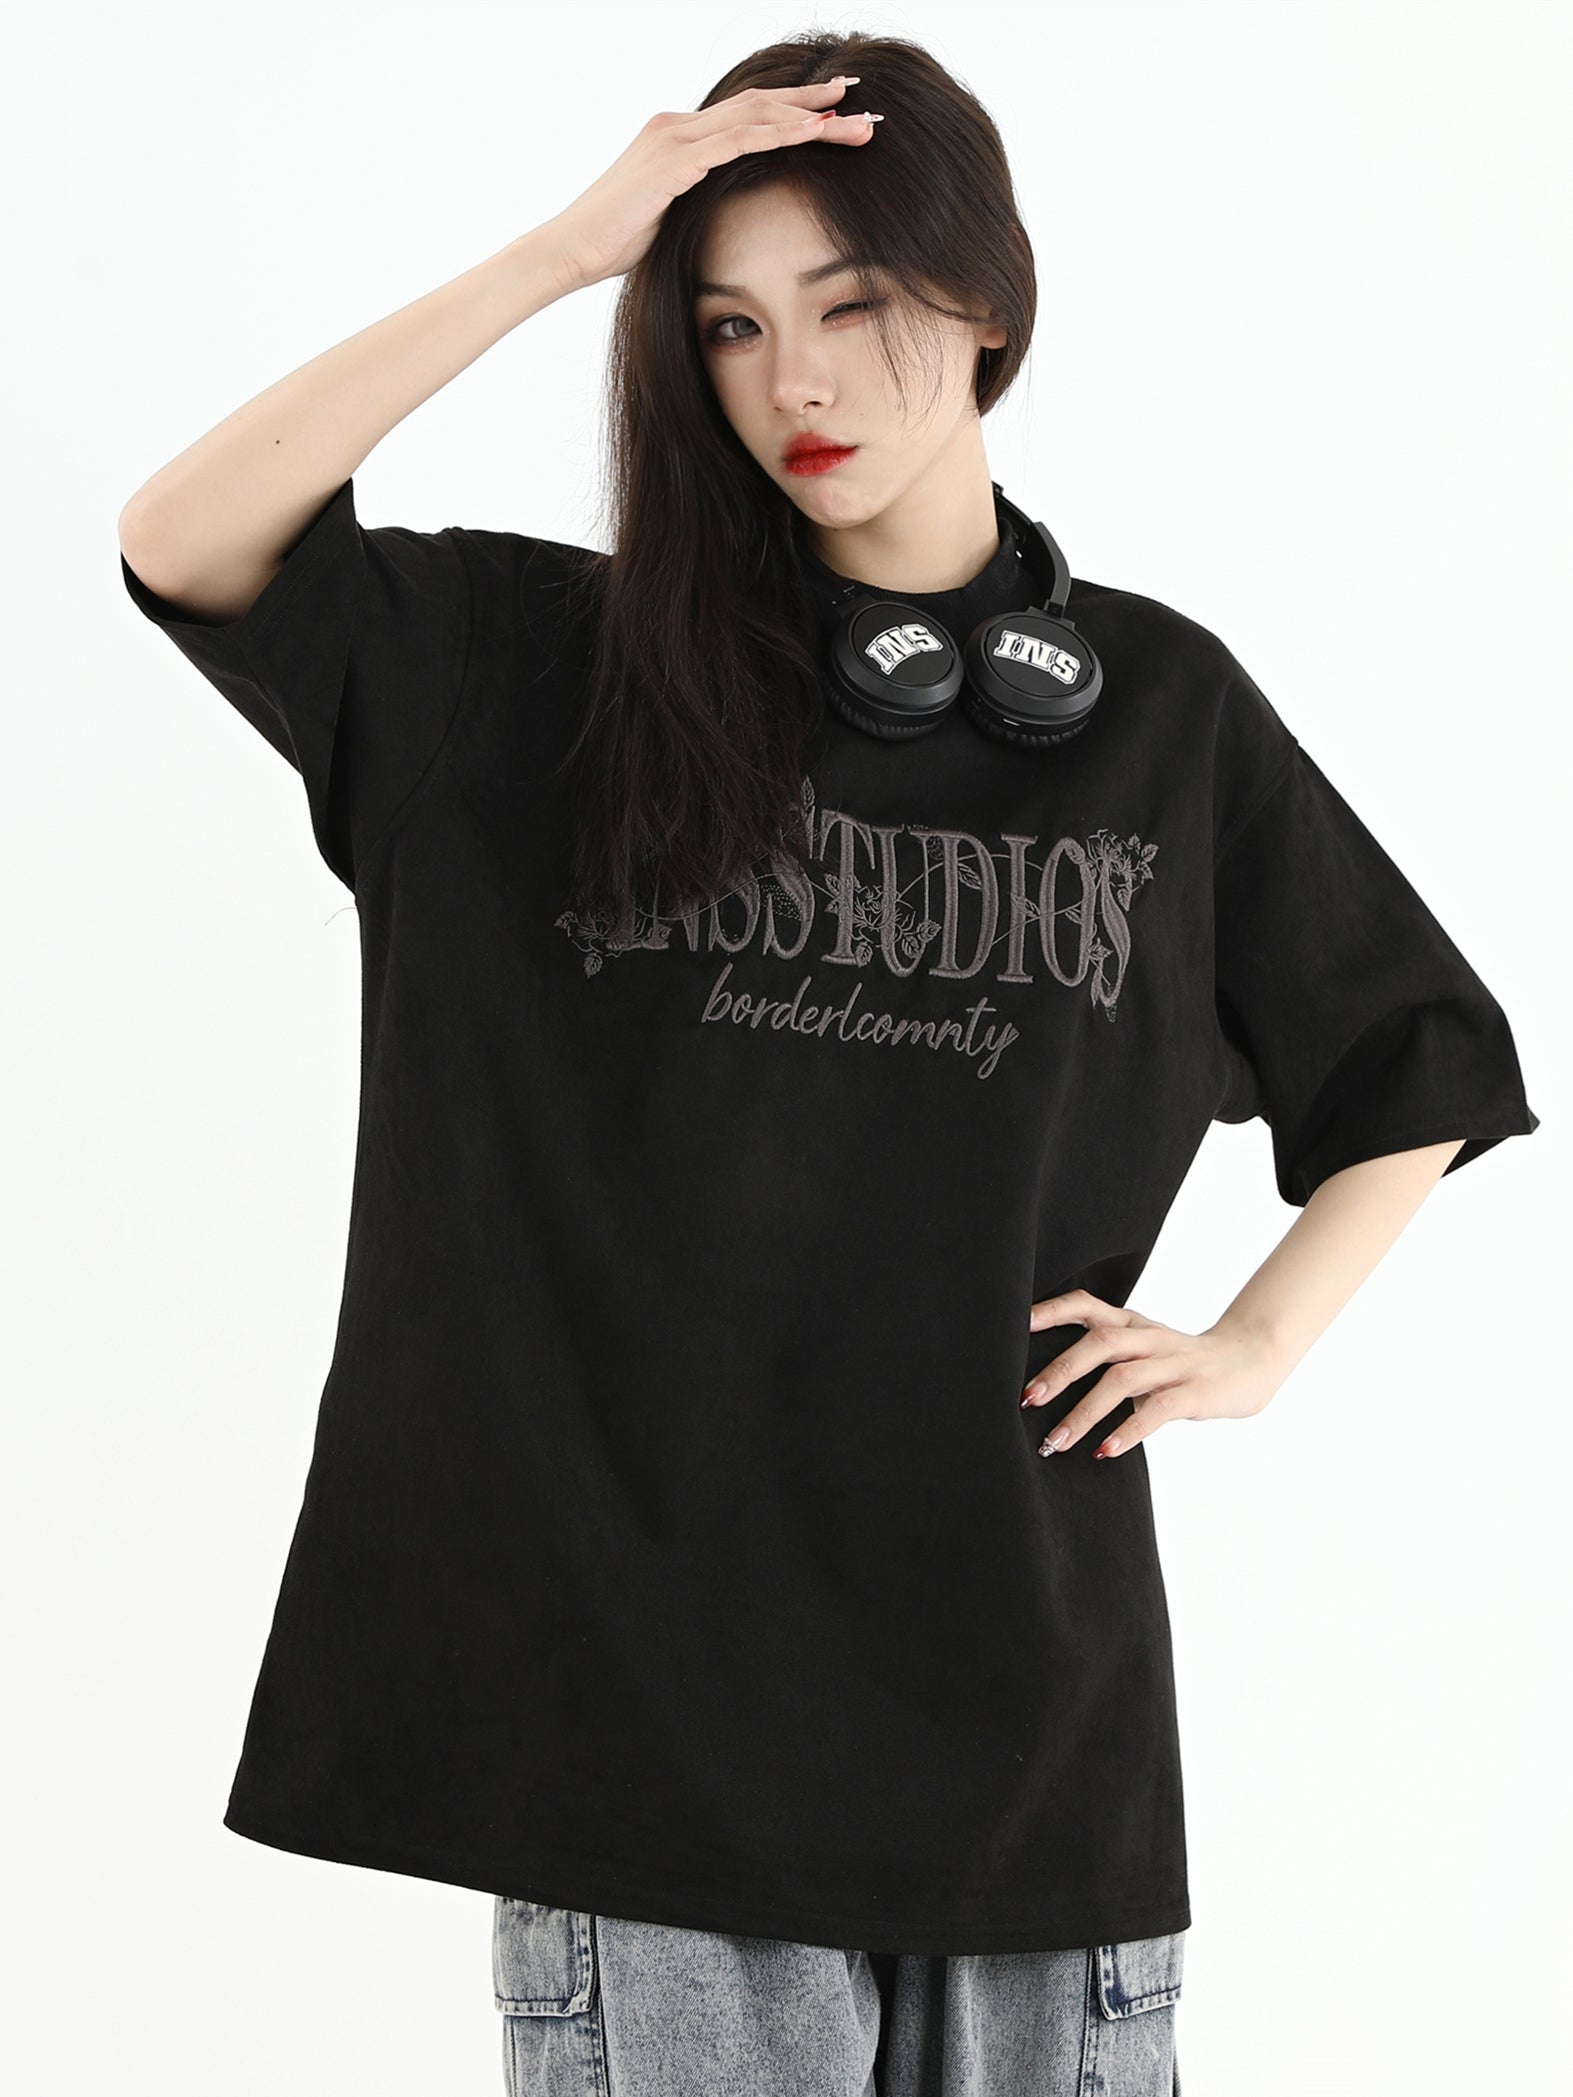 Streetwear Insstudios Sueded Embroidered Logo T-Shirt